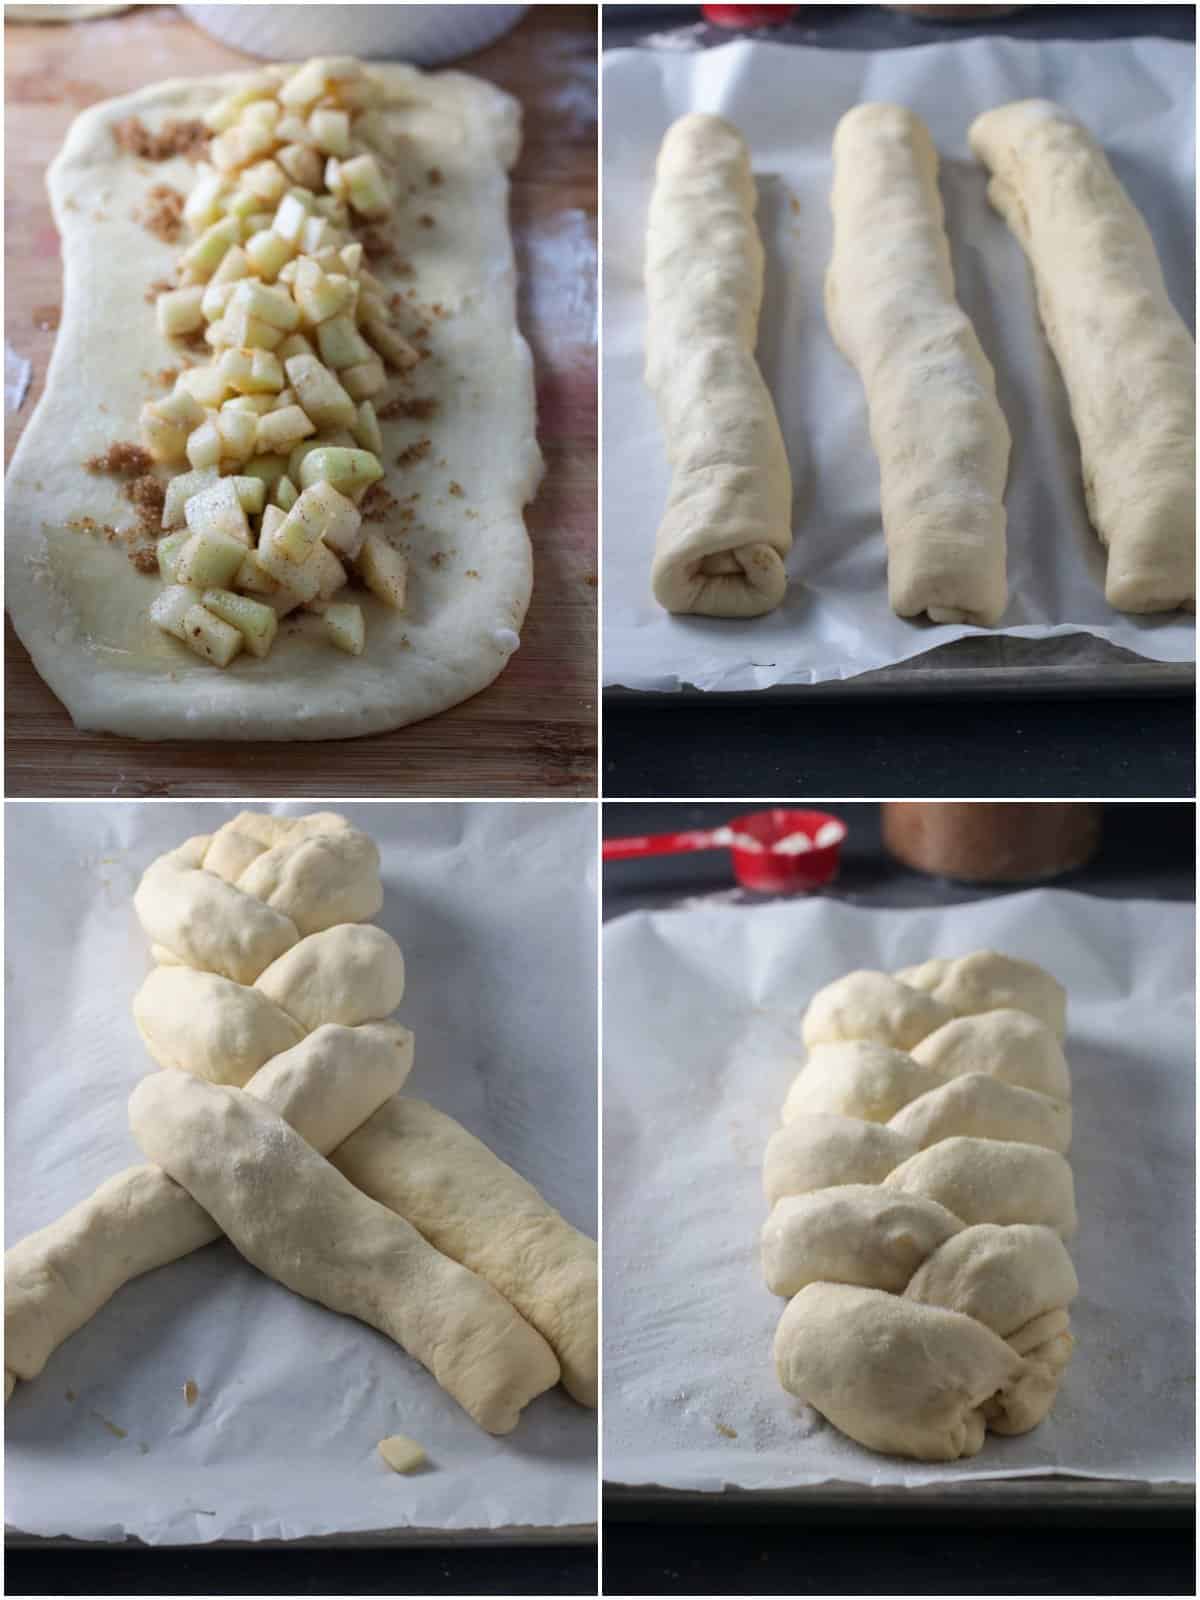 A collage showing the process of assembling an Apple challah.